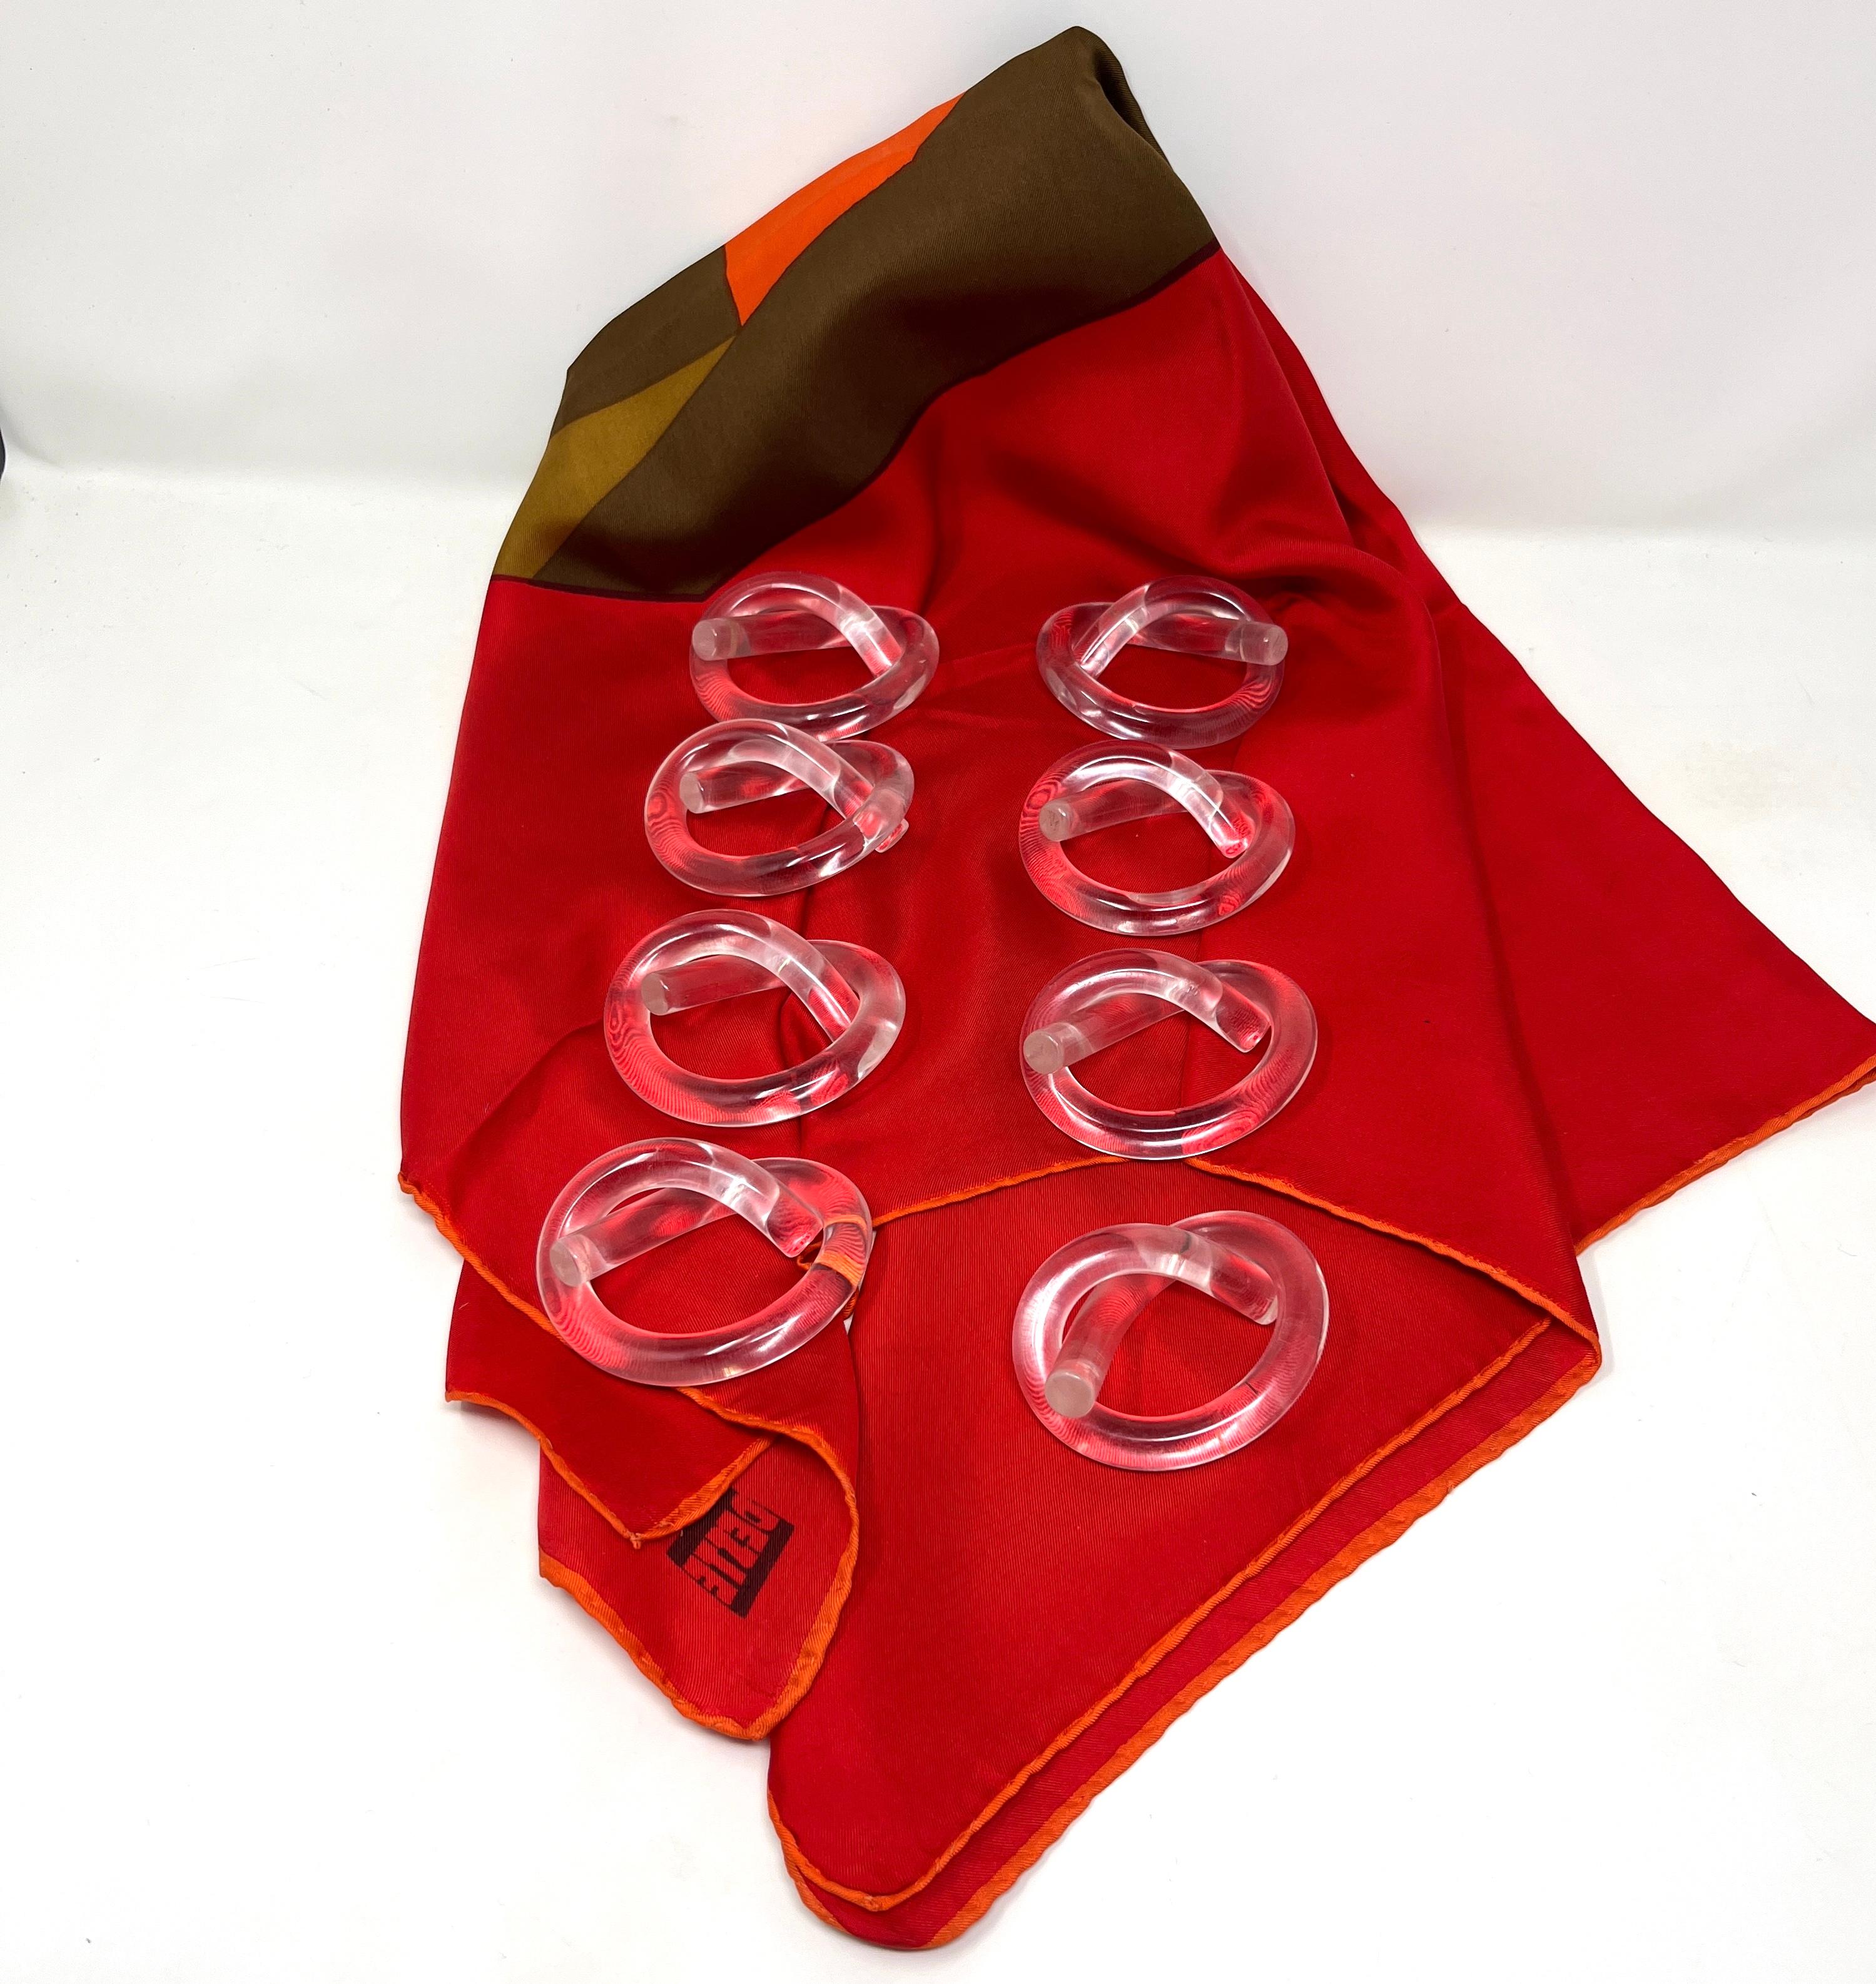 Set of 8 mid-century modern Lucite pretzel-shaped napkin rings designed by Dorothy Thorpe. Single tubes of solid Lucite are wrapped into a pretzel-like form as ideal napkin rings. They can also be used as utensil rests. 

Very good to excellent